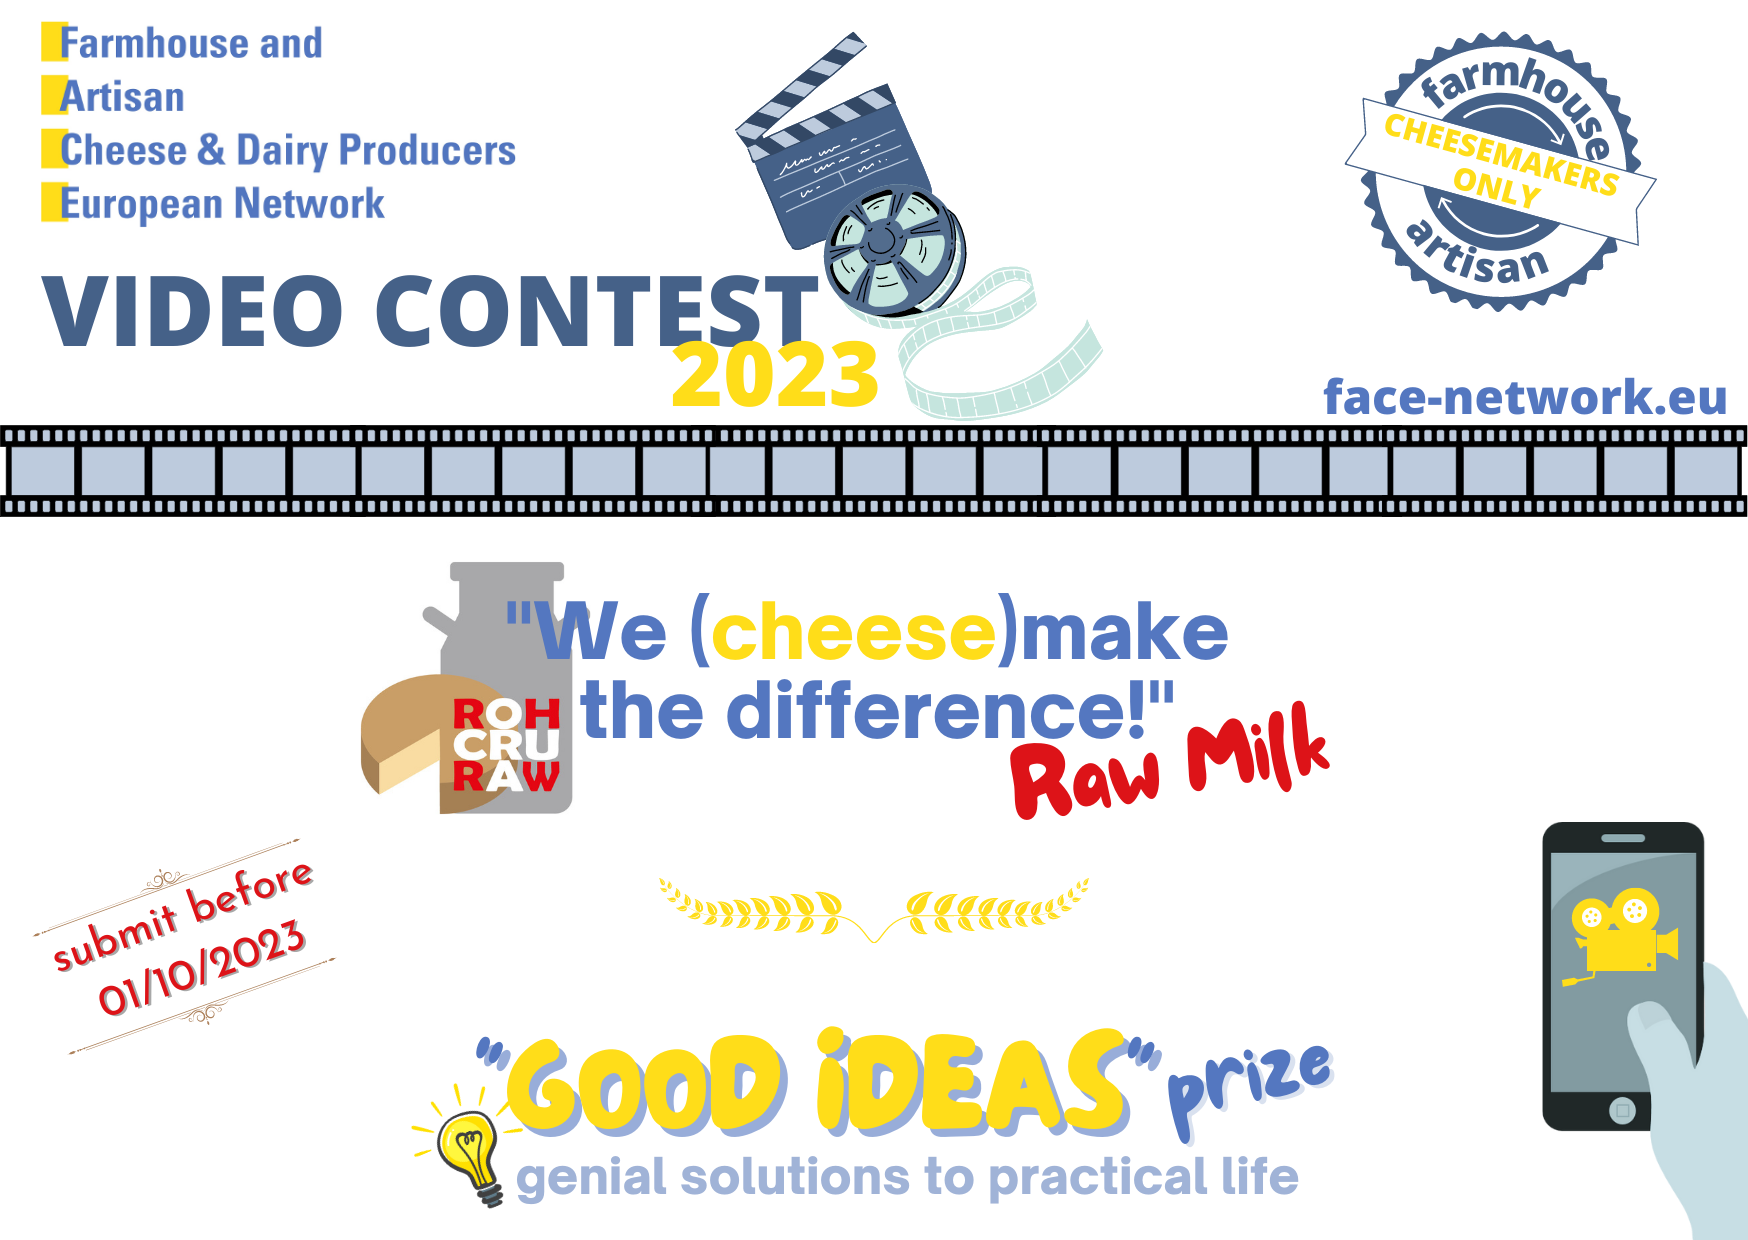 [News from FACE] Video Contest 2023 to go!